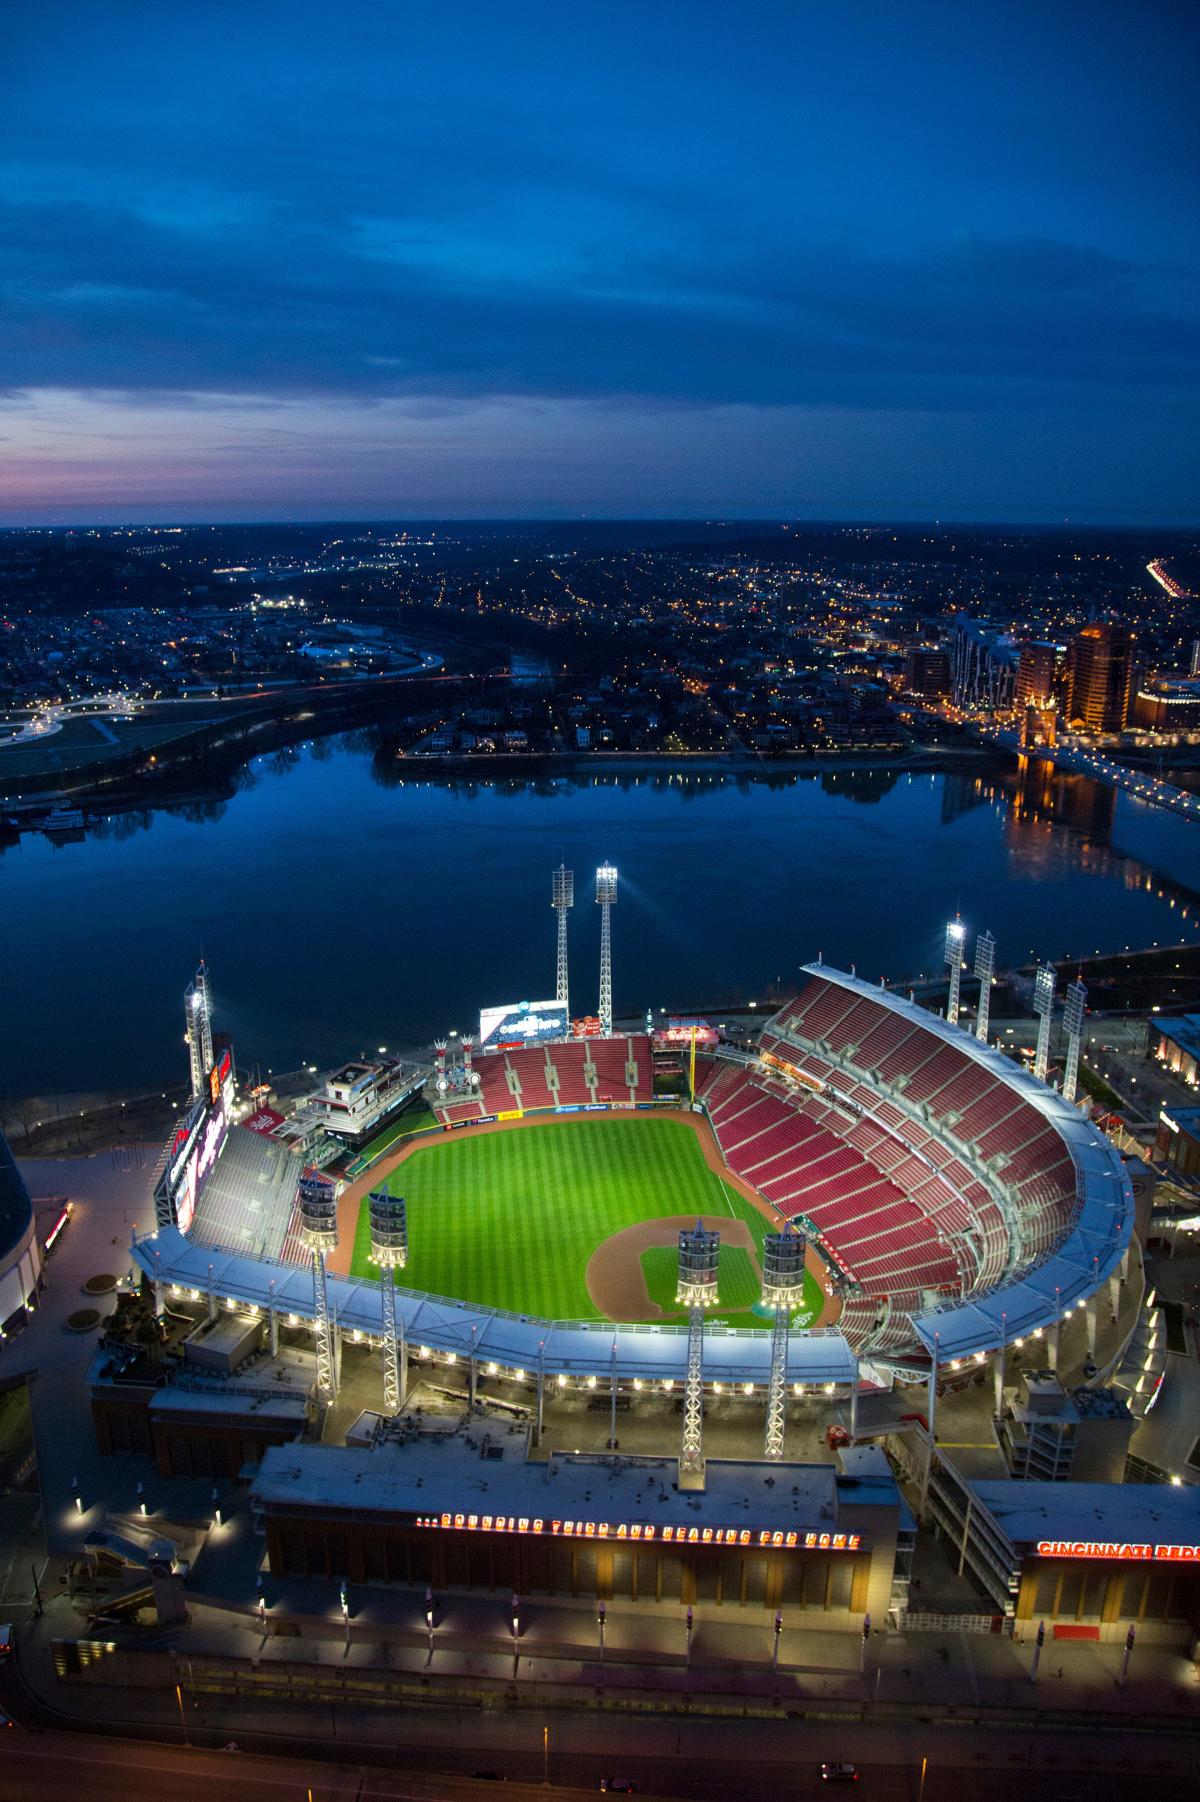 Visiting Great American Ball Park for a Reds game this year? What to know before you go